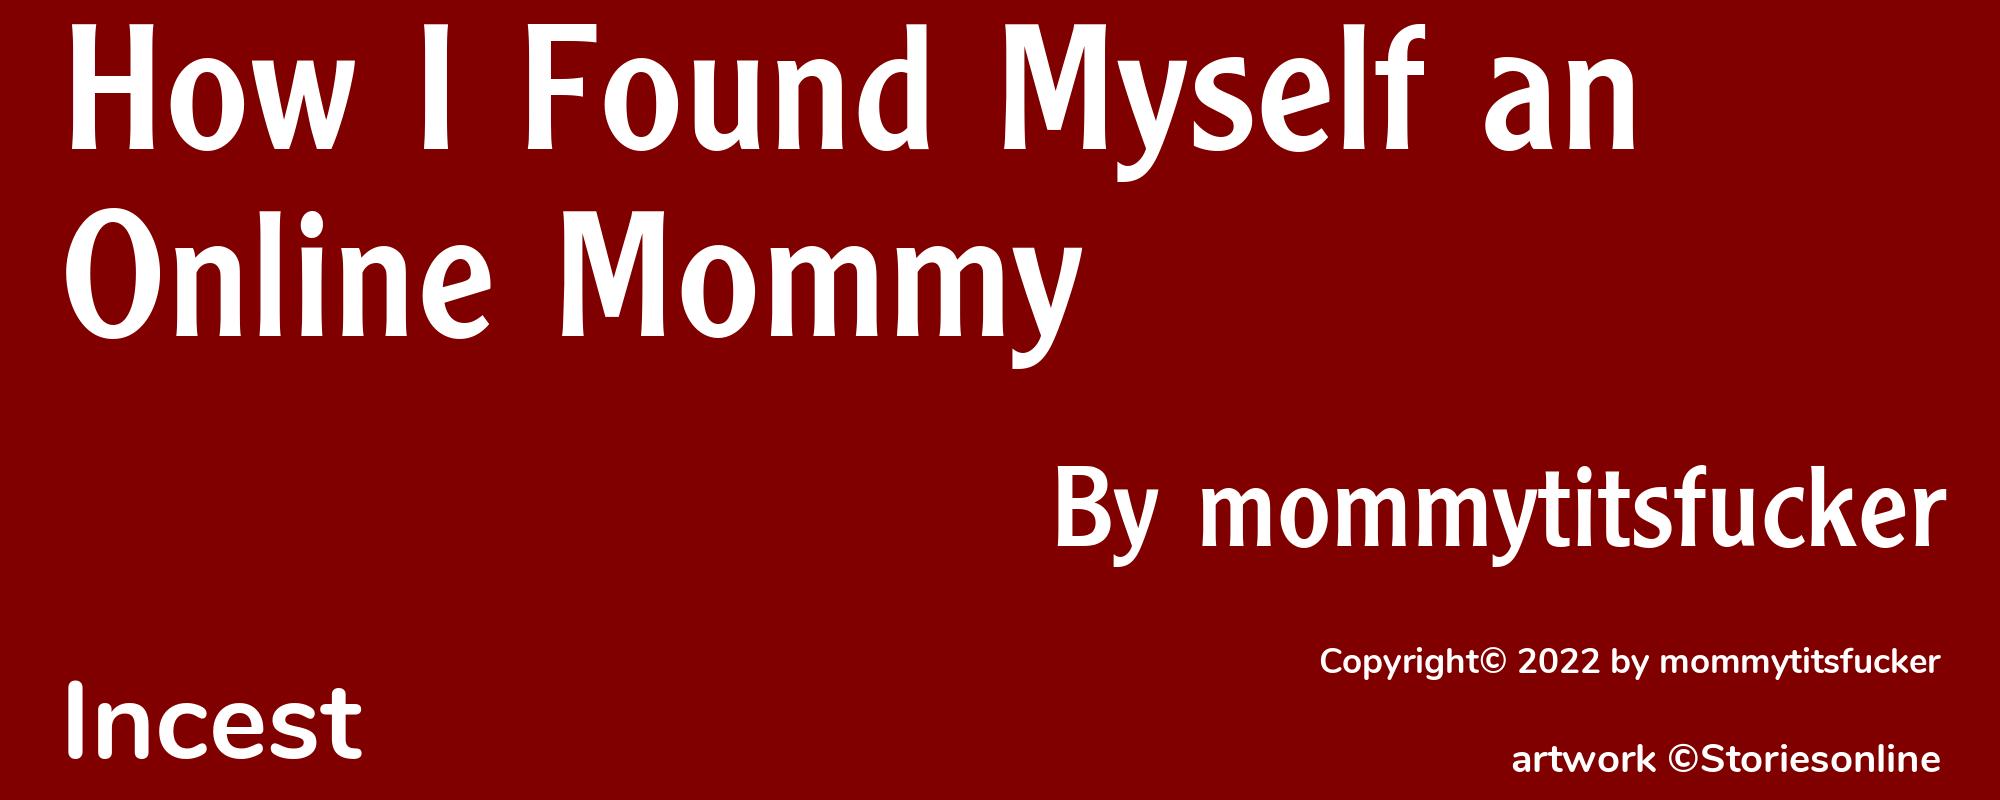 How I Found Myself an Online Mommy - Cover